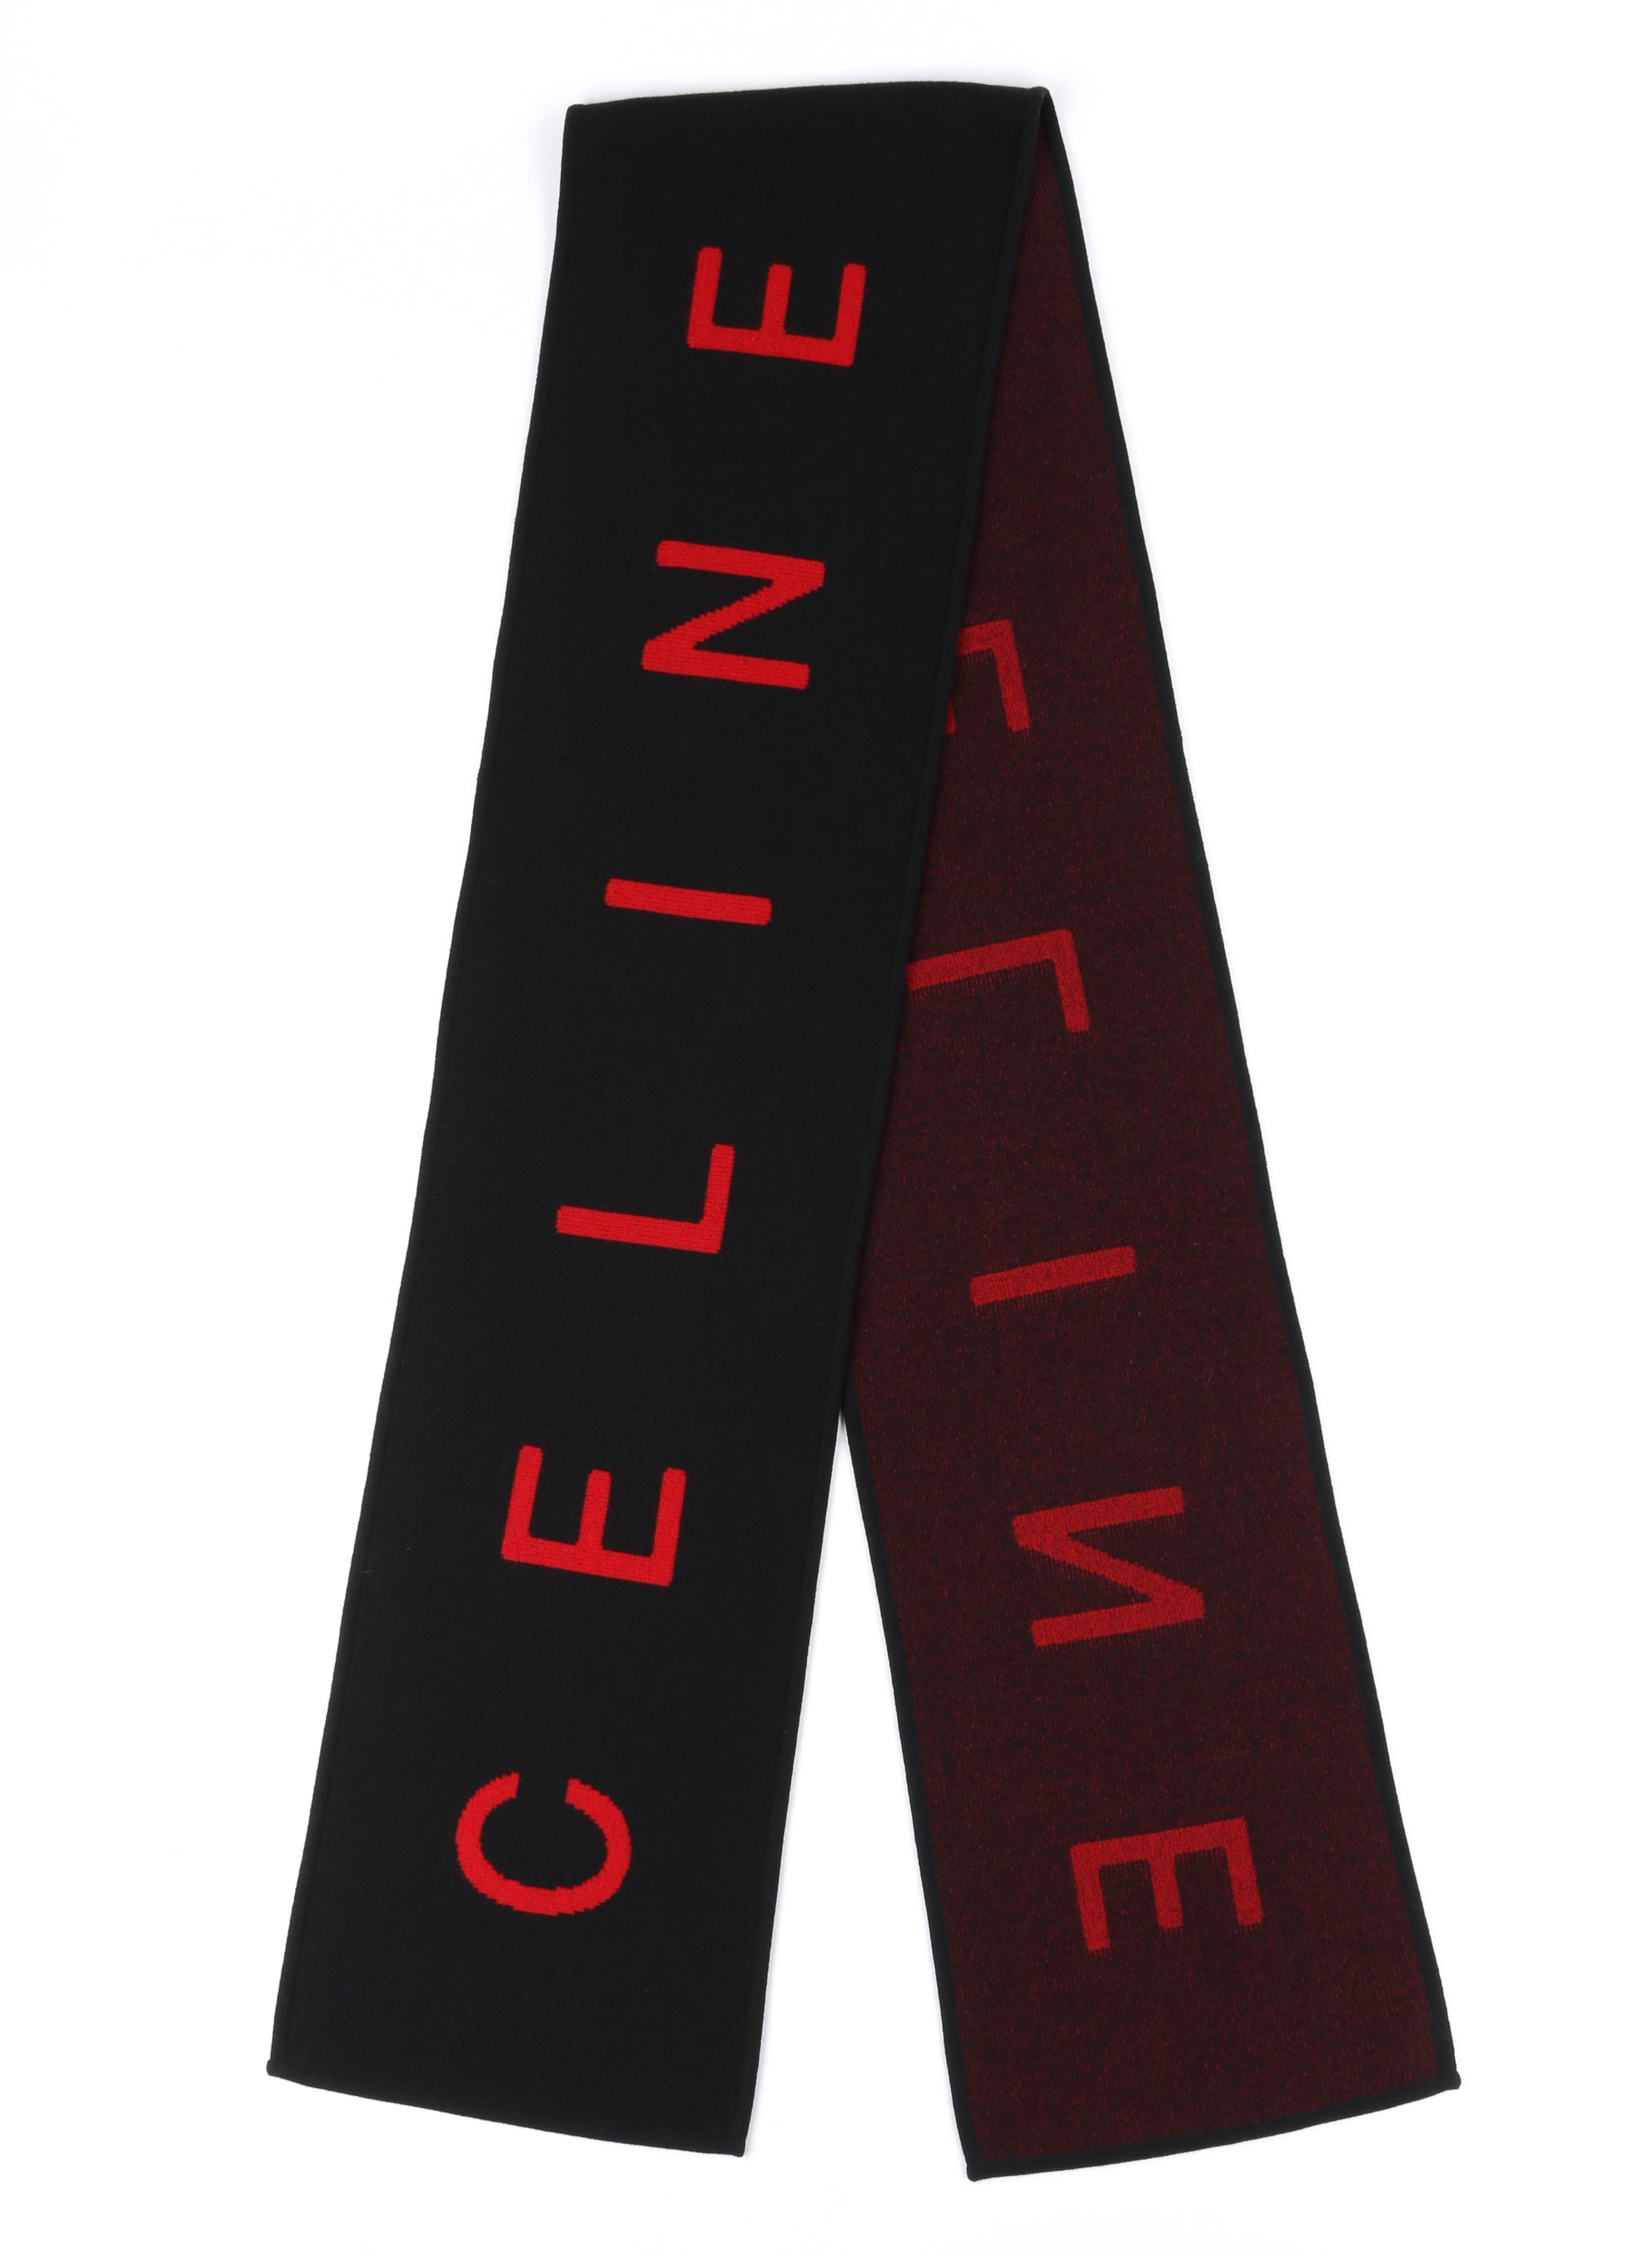 Celine black & red wool blend double knit scarf. Long oblong shape. Black background with red "Celine" pattern. Rib knit boarder. Unmarked Fabric Content: Wool blend. Measurements:

Length: 110"
Width: 13"